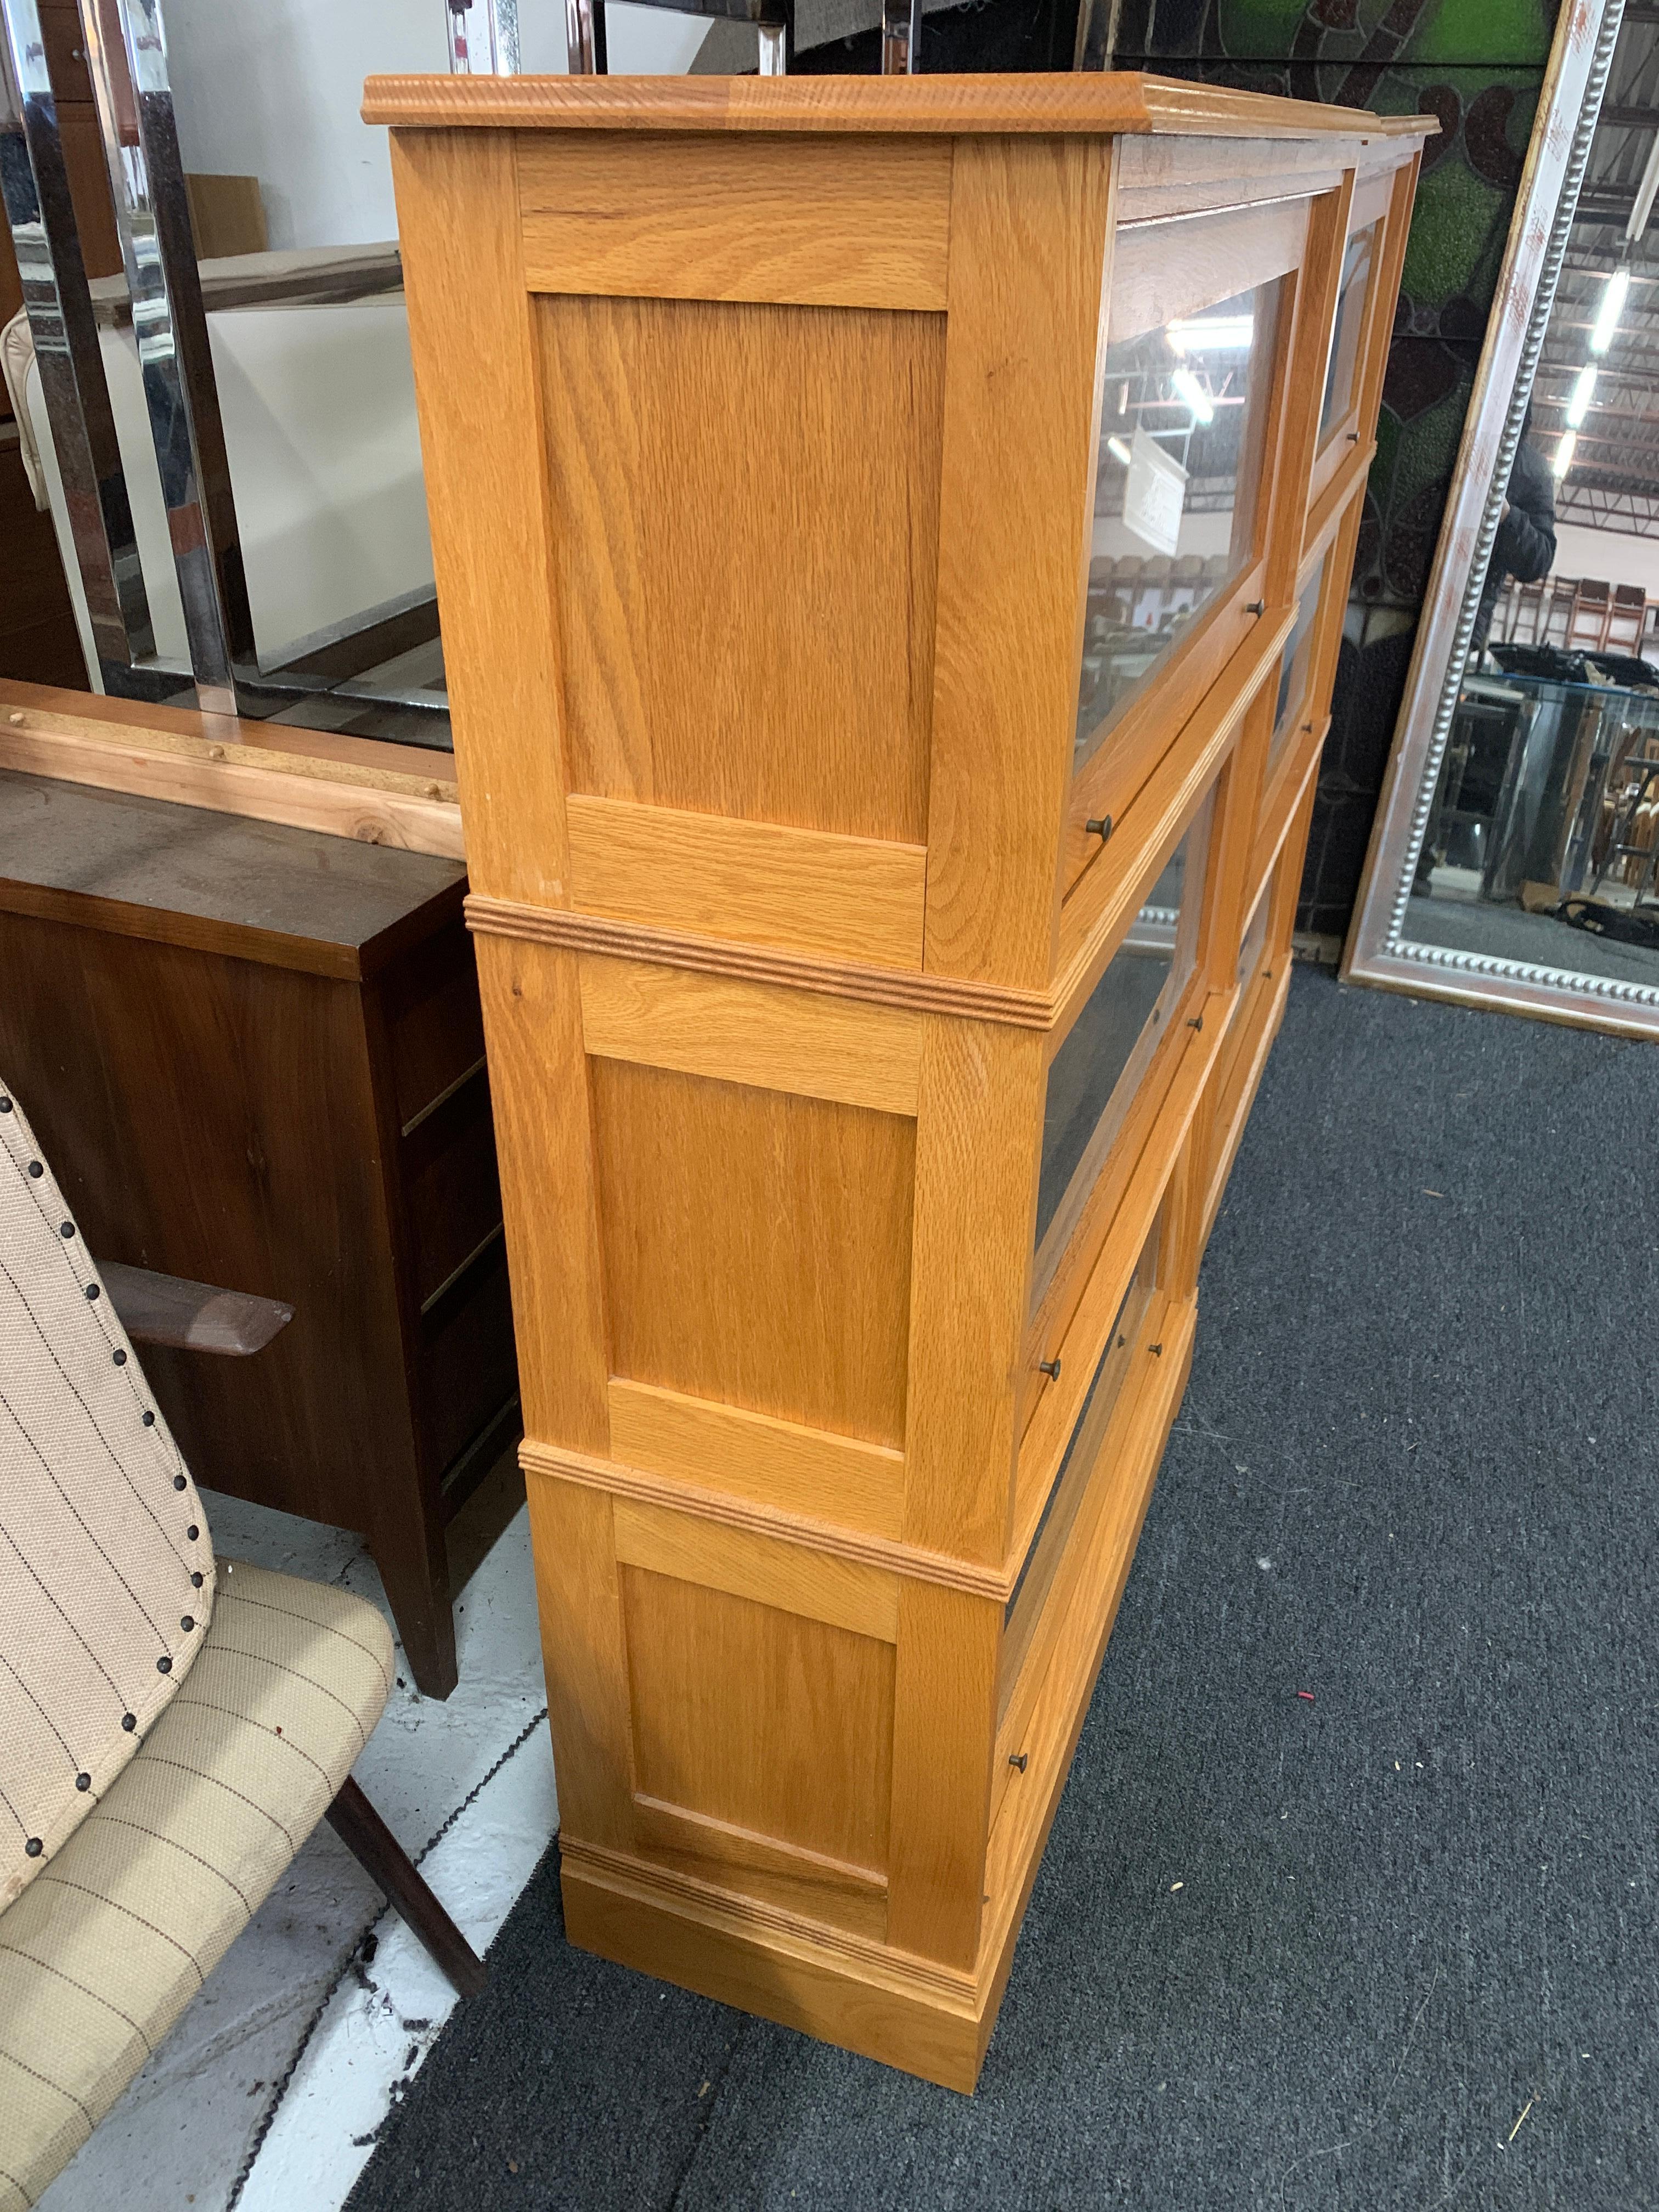 Pair (2) Solid oak barrister bookcases. Perfect for any room in need of MCM style book storage. 